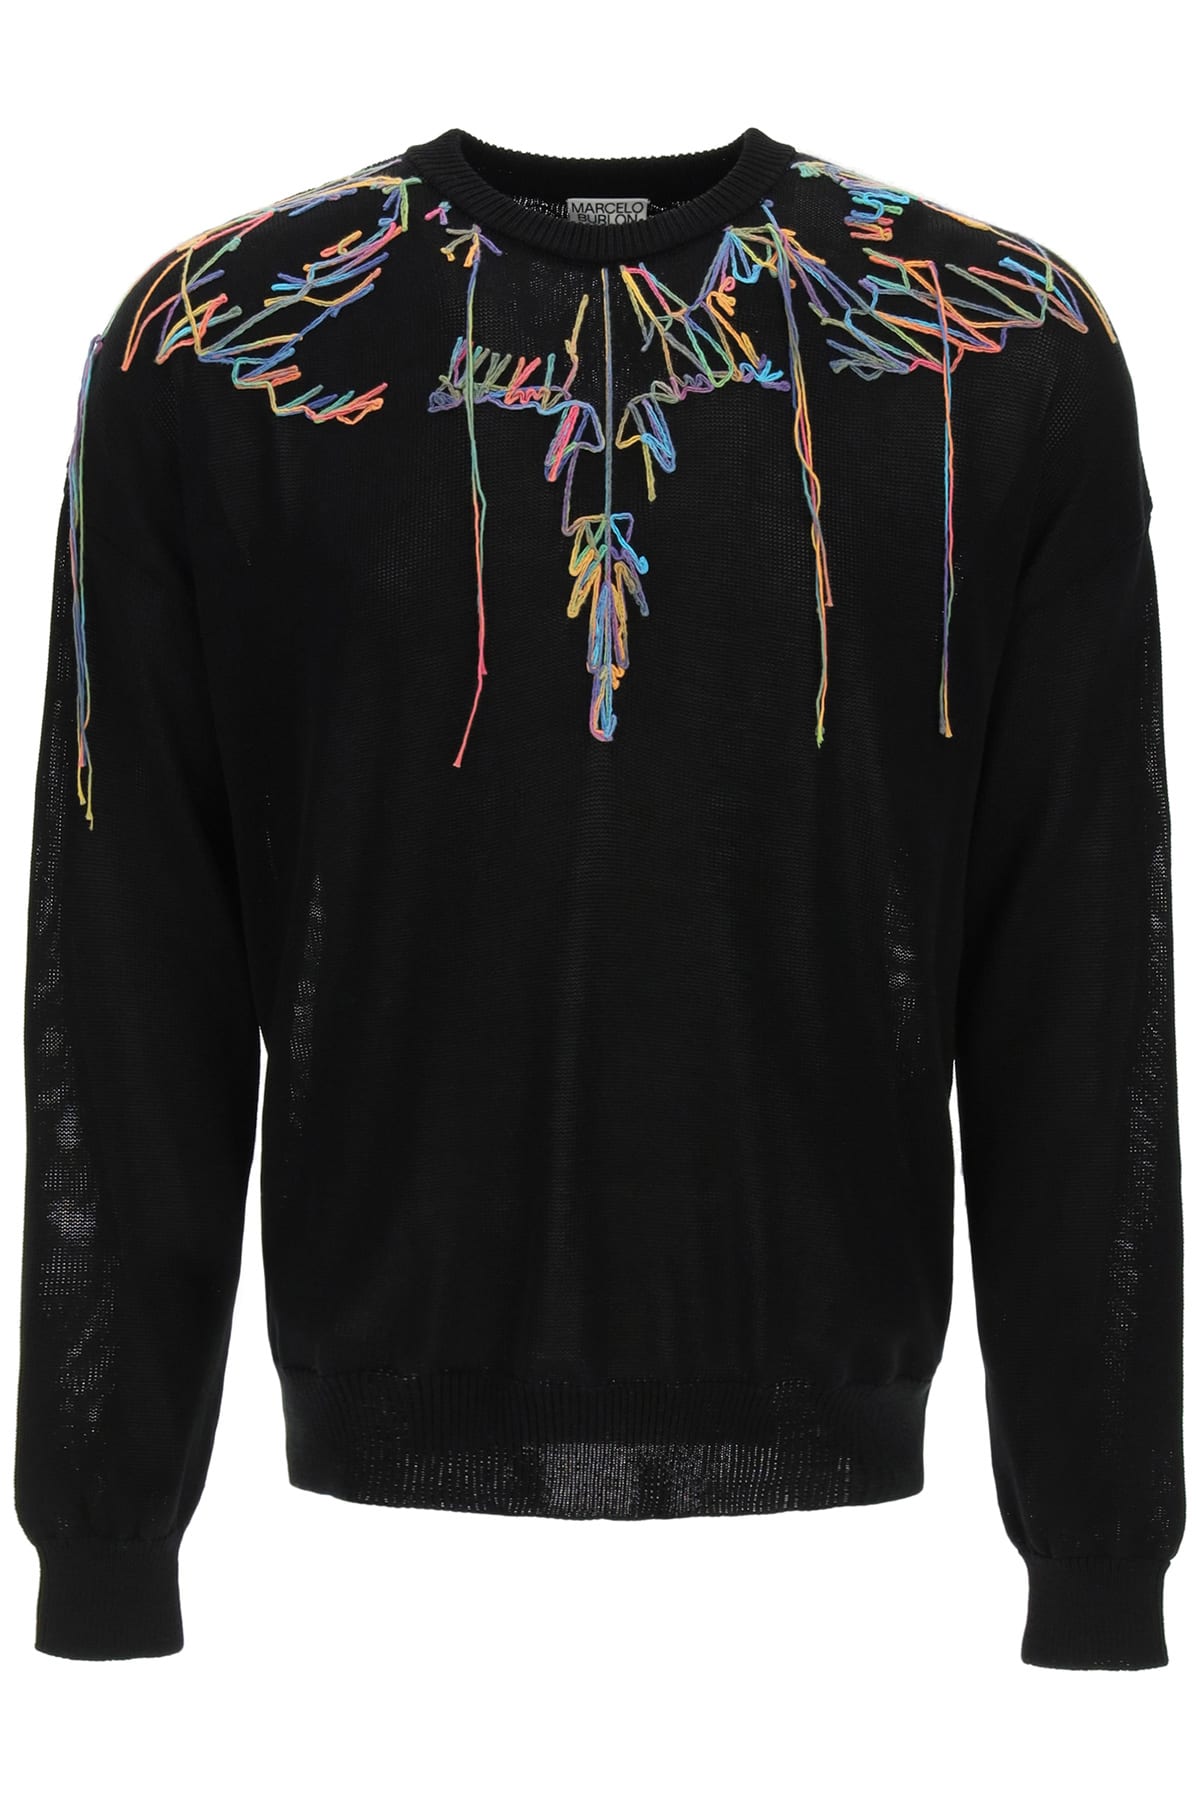 Marcelo Burlon County Of Milan WINGS EMBROIDERY SWEATER